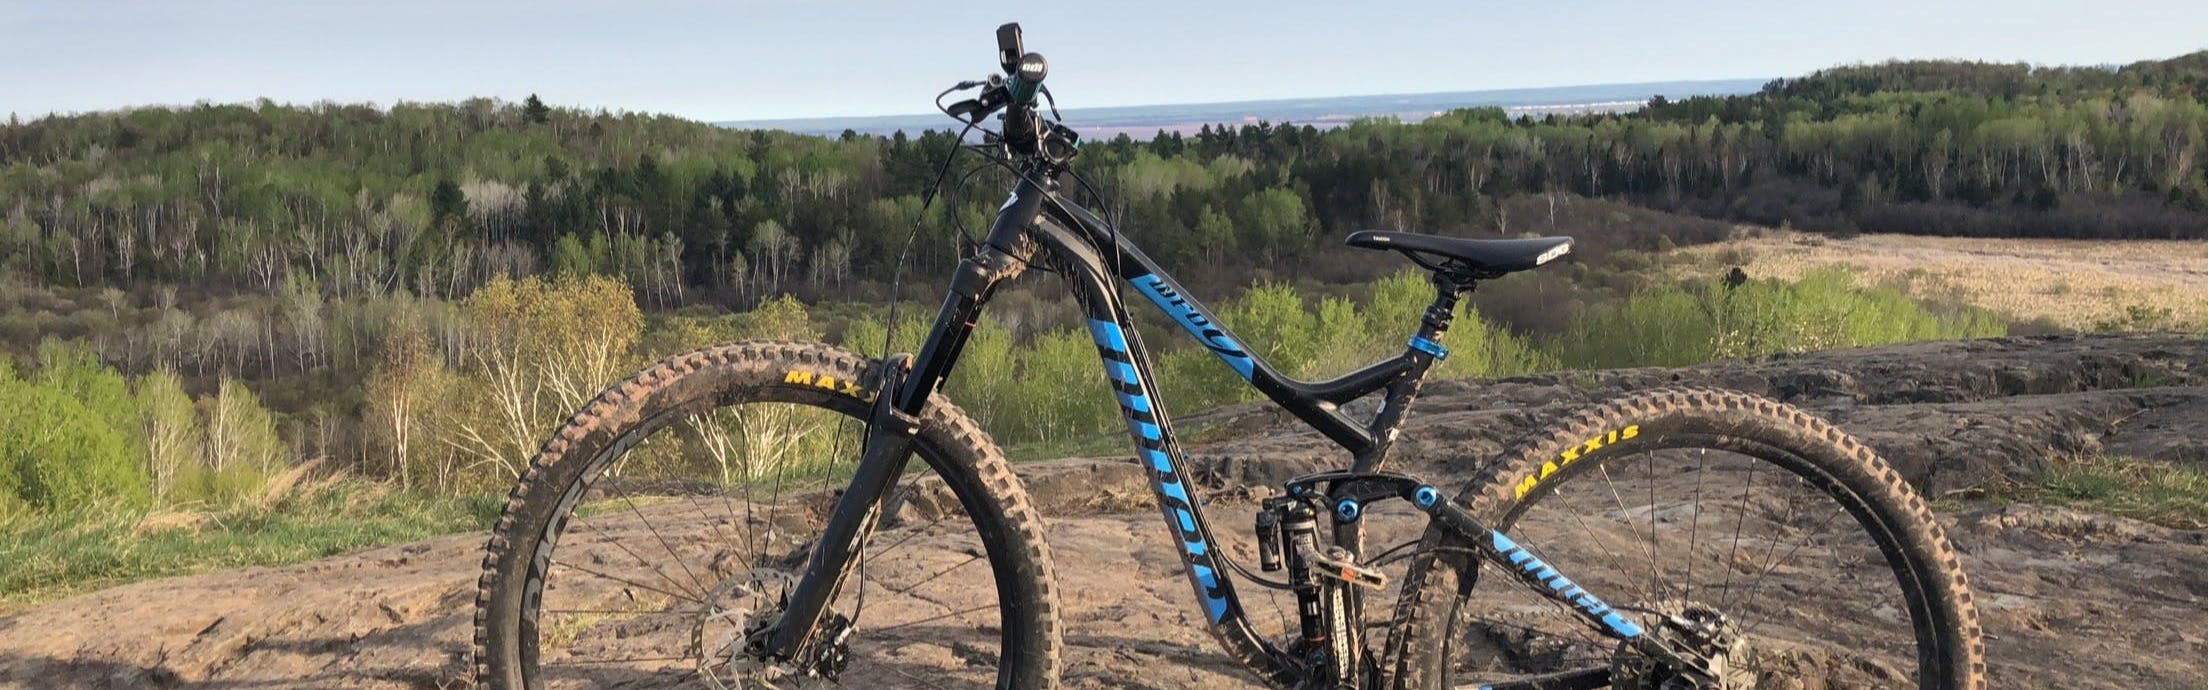 The Niner WFO 9 bike at an overlook with mountains and trees in the background.